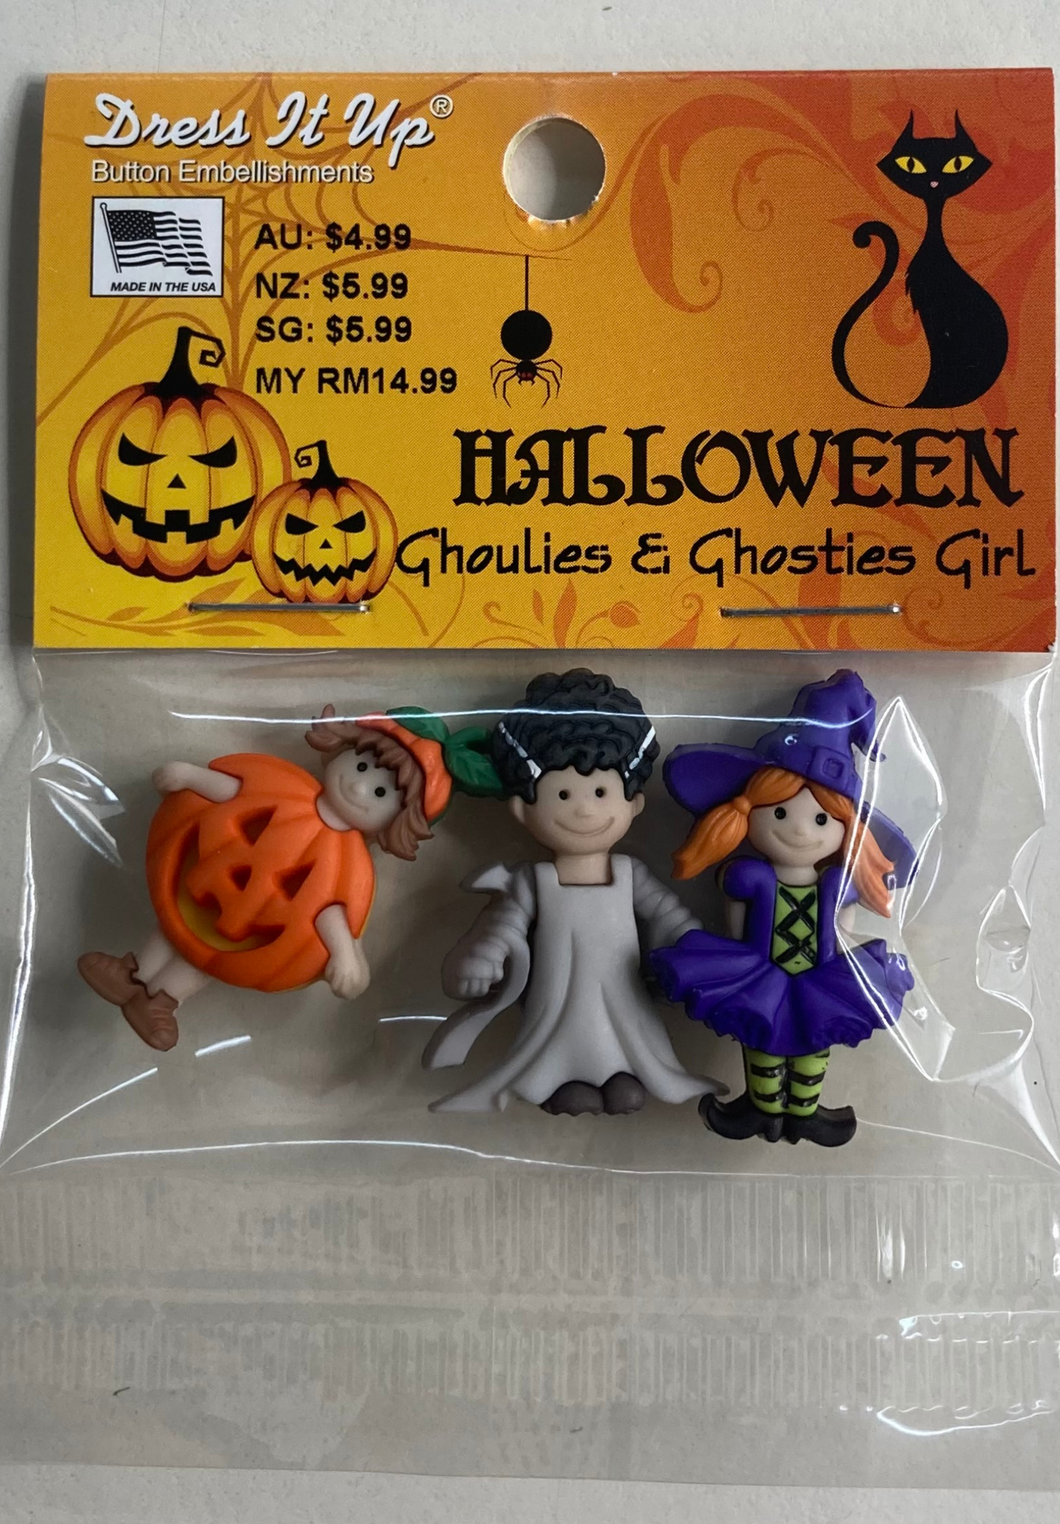 Ghoulies & Ghosties Girl Buttons